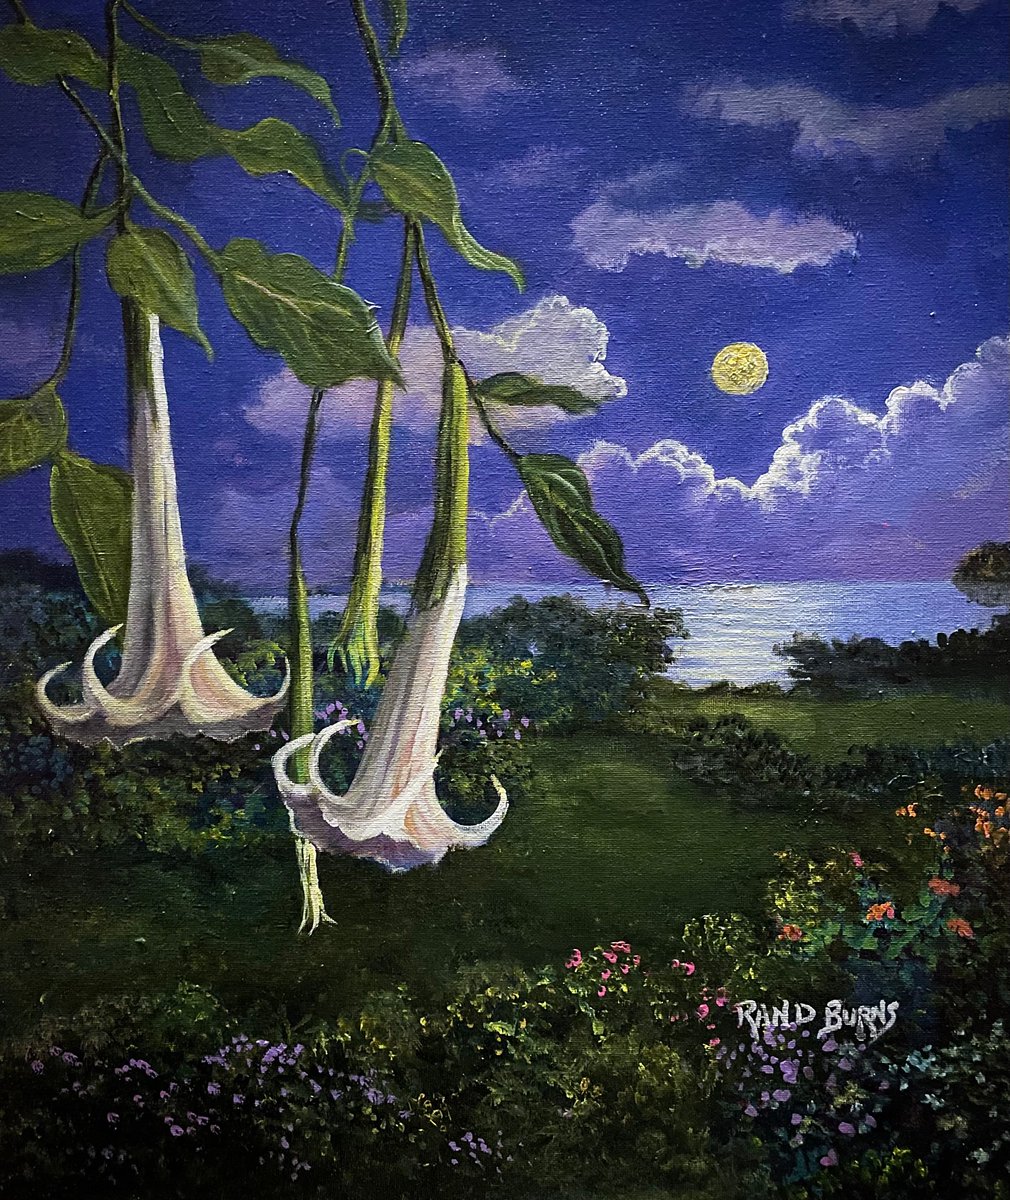 Twilight Trumpets, 24 x 20”. Painting. Heralding the light of a summer moon, angel trumpet daturas share their song on a warm summer night.